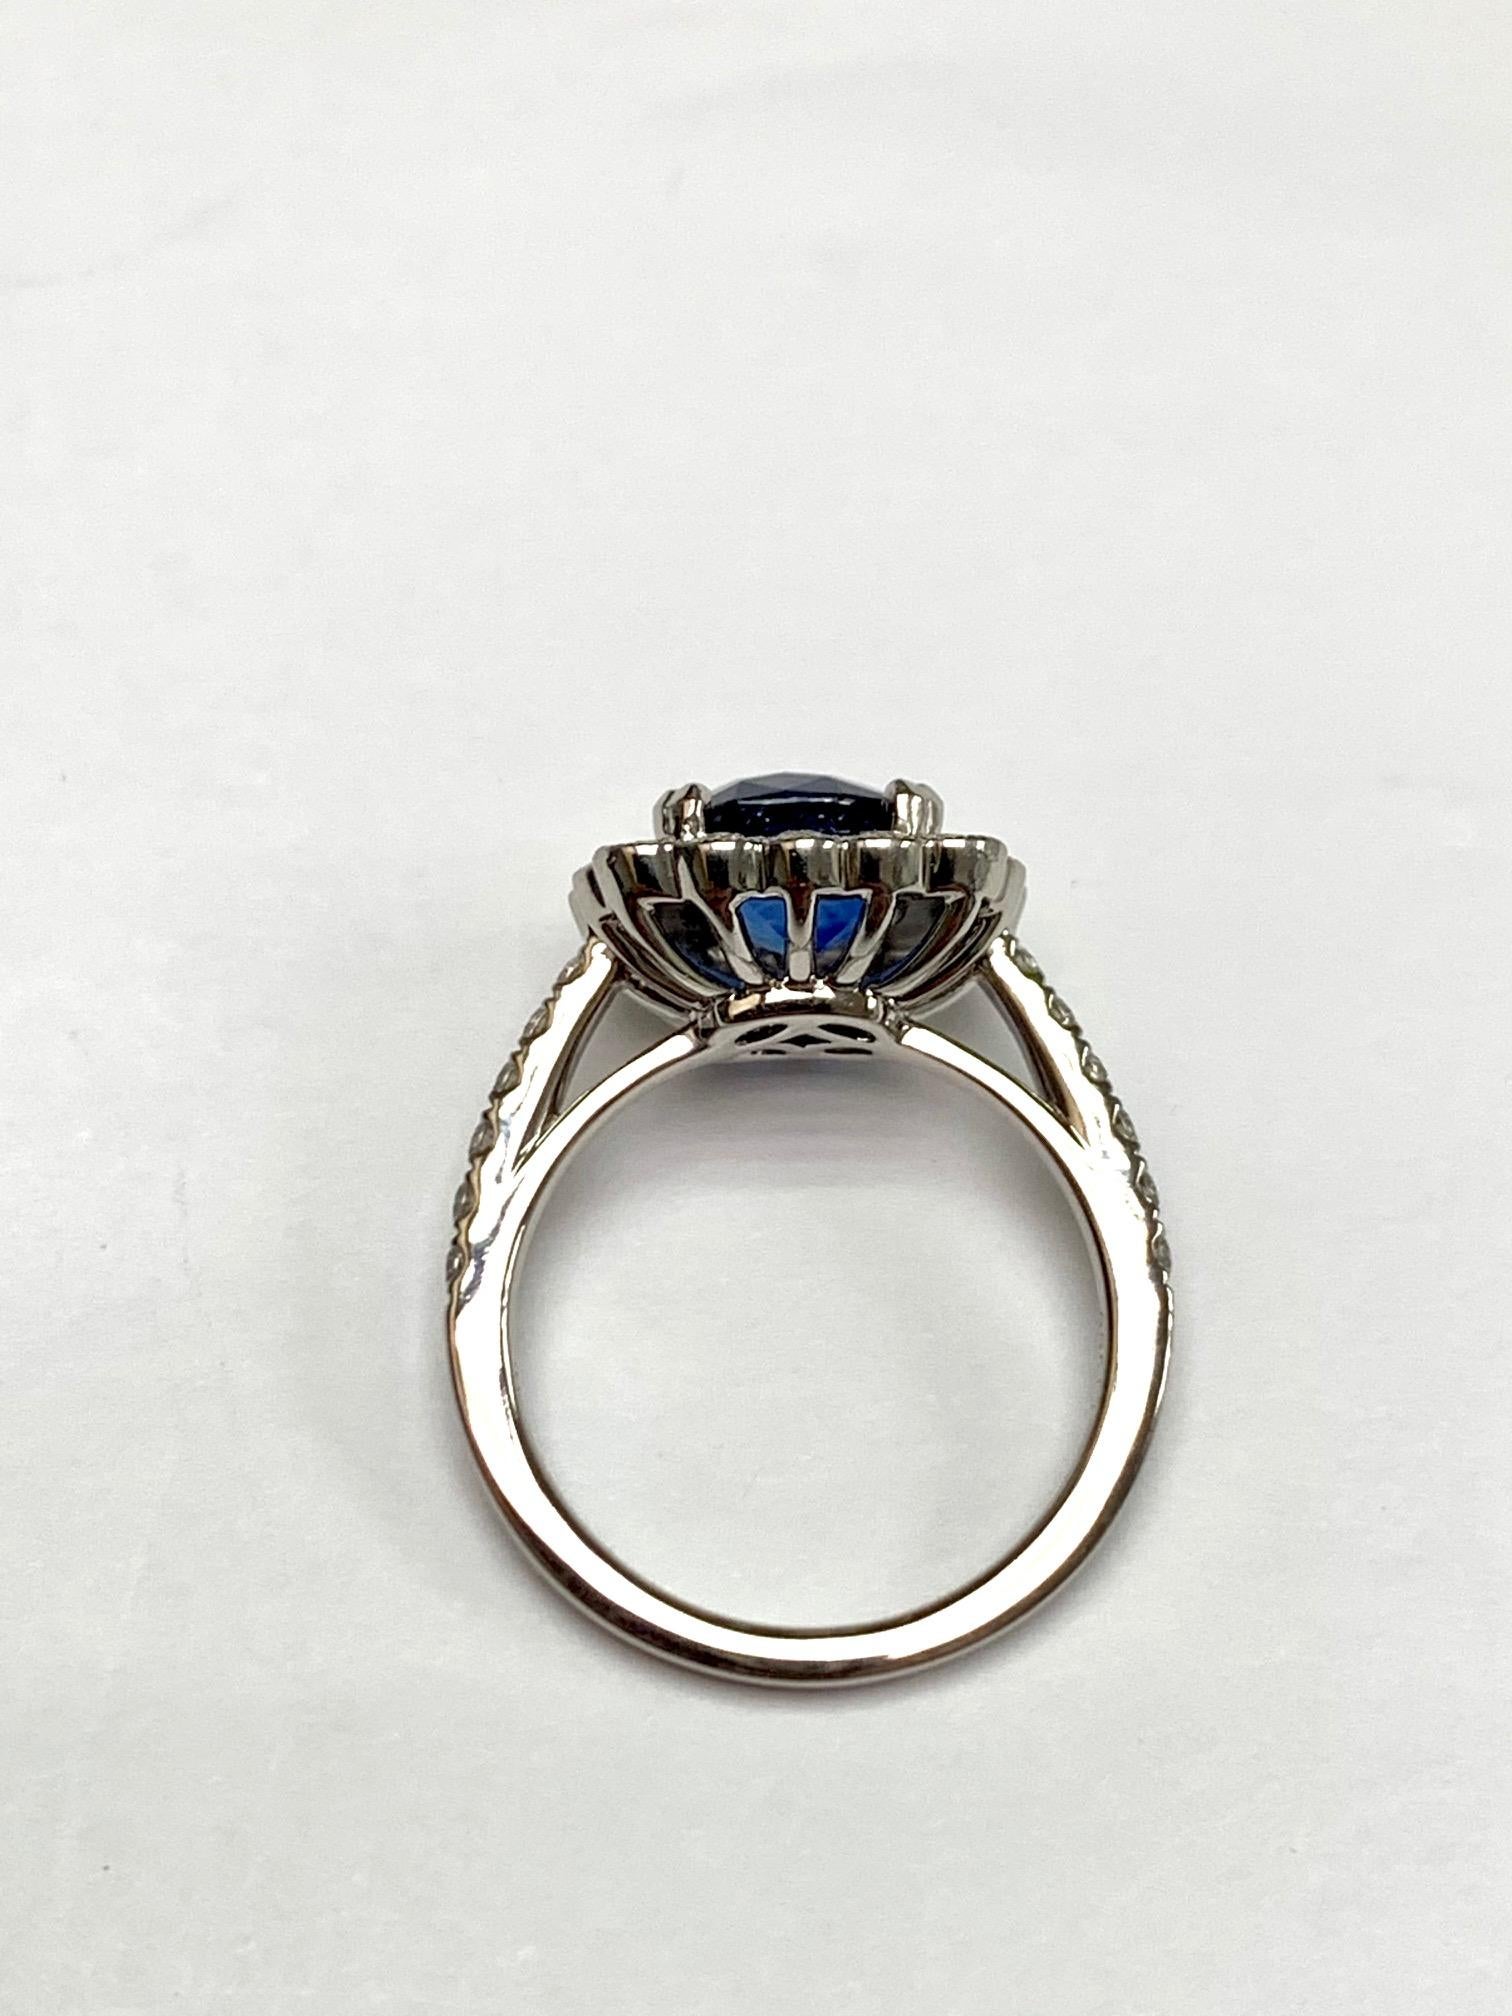 Cushion Cut CDC Lab Certified 3.21 Carat Cushion Blue Sapphire Diamonds Cocktail Ring For Sale